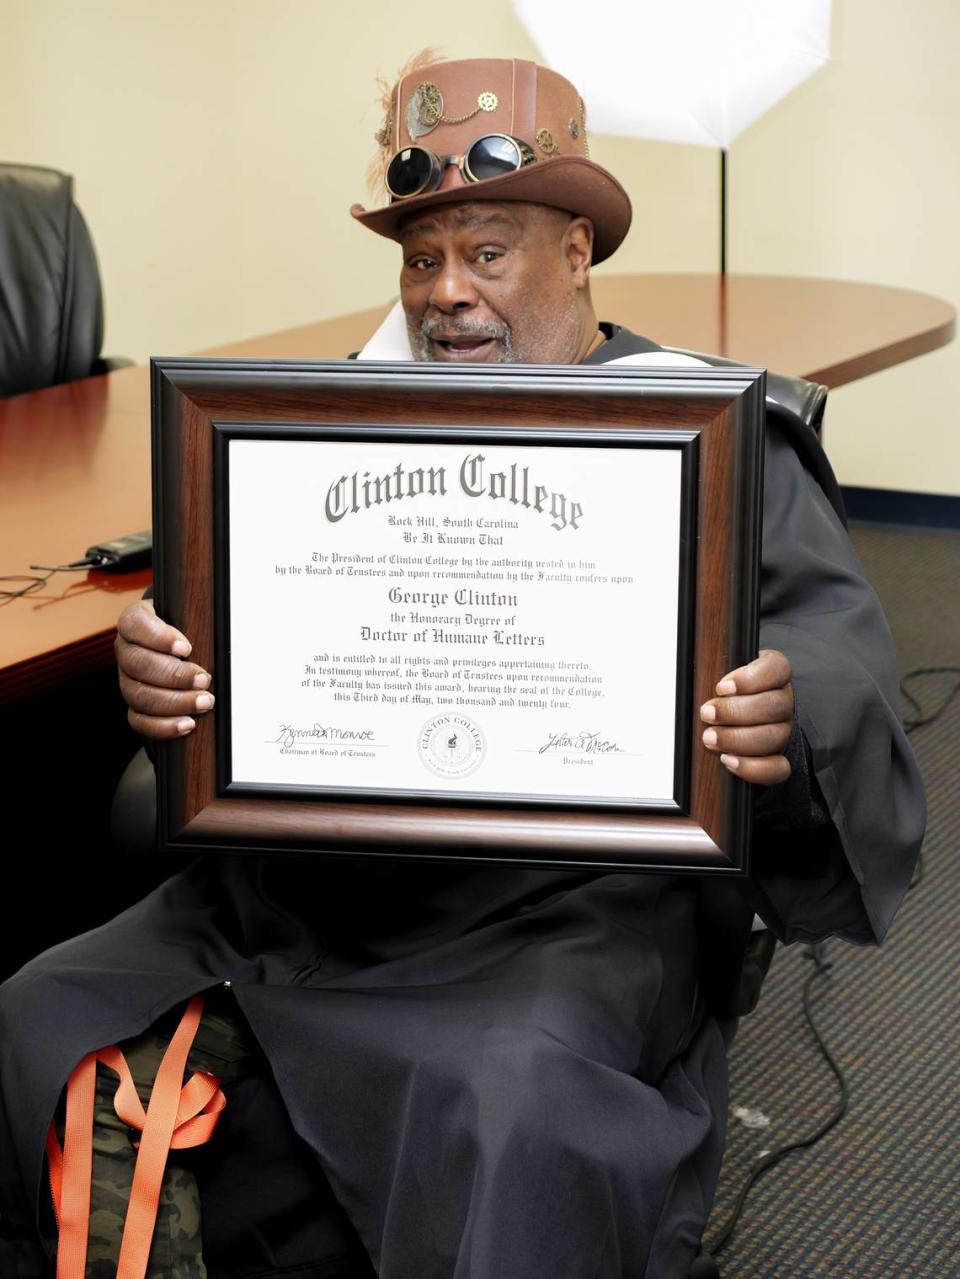 George Clinton with the honorary degree he received Friday from Clinton College in Rock Hill. Clinton is known for his funk music style and a host of awards, including a Grammy Lifetime Achievement and Rock & Roll Hall of Fame induction.